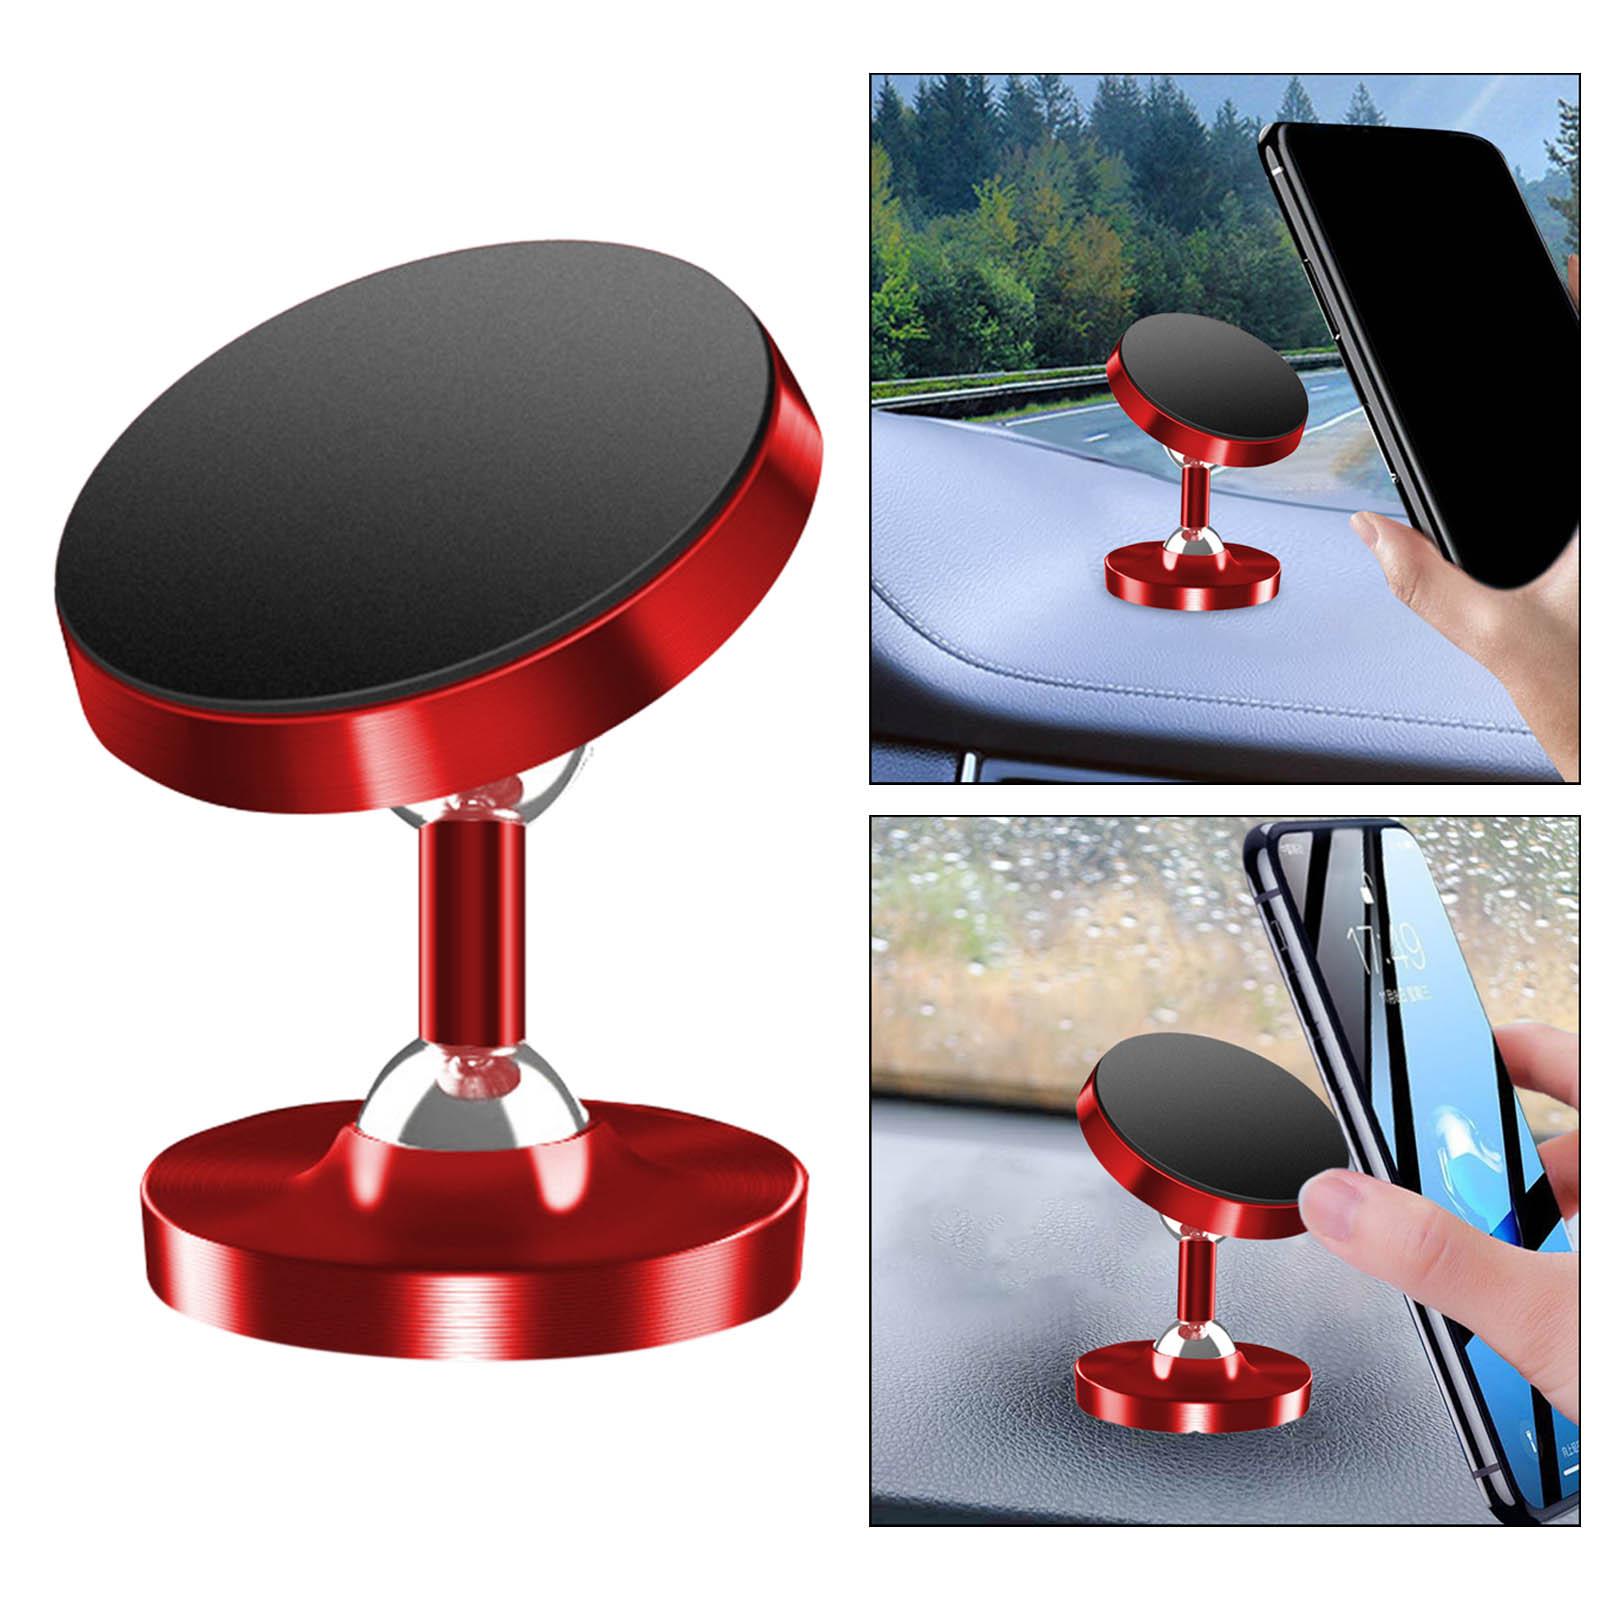 Phone Holder Stable Support 360° Rotation Multifunctional Phone Mount Stand Red